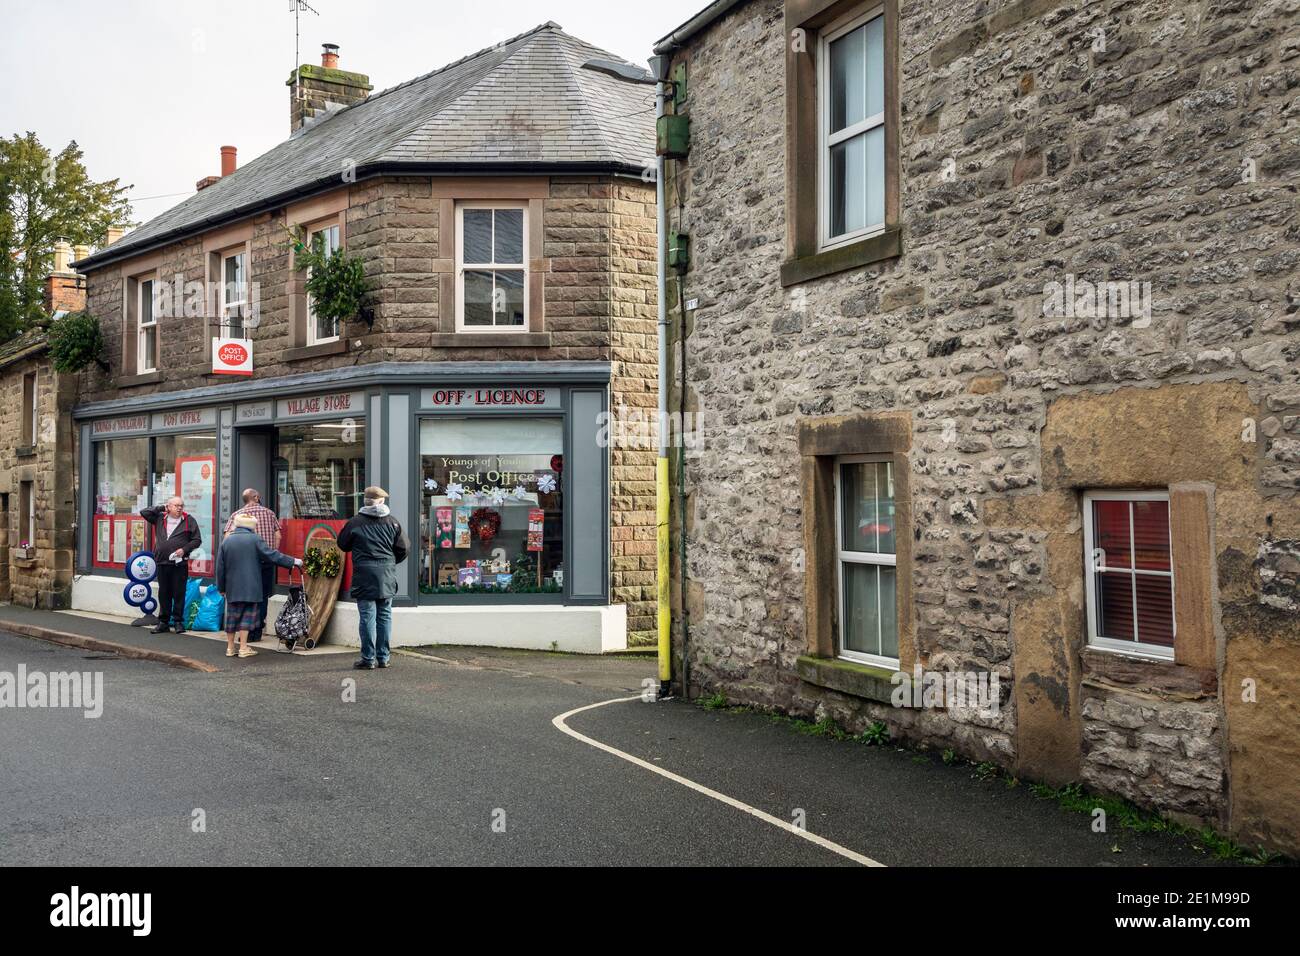 The village store and post office, Youlgrave, Peak District National Park, Derbyshire Stock Photo